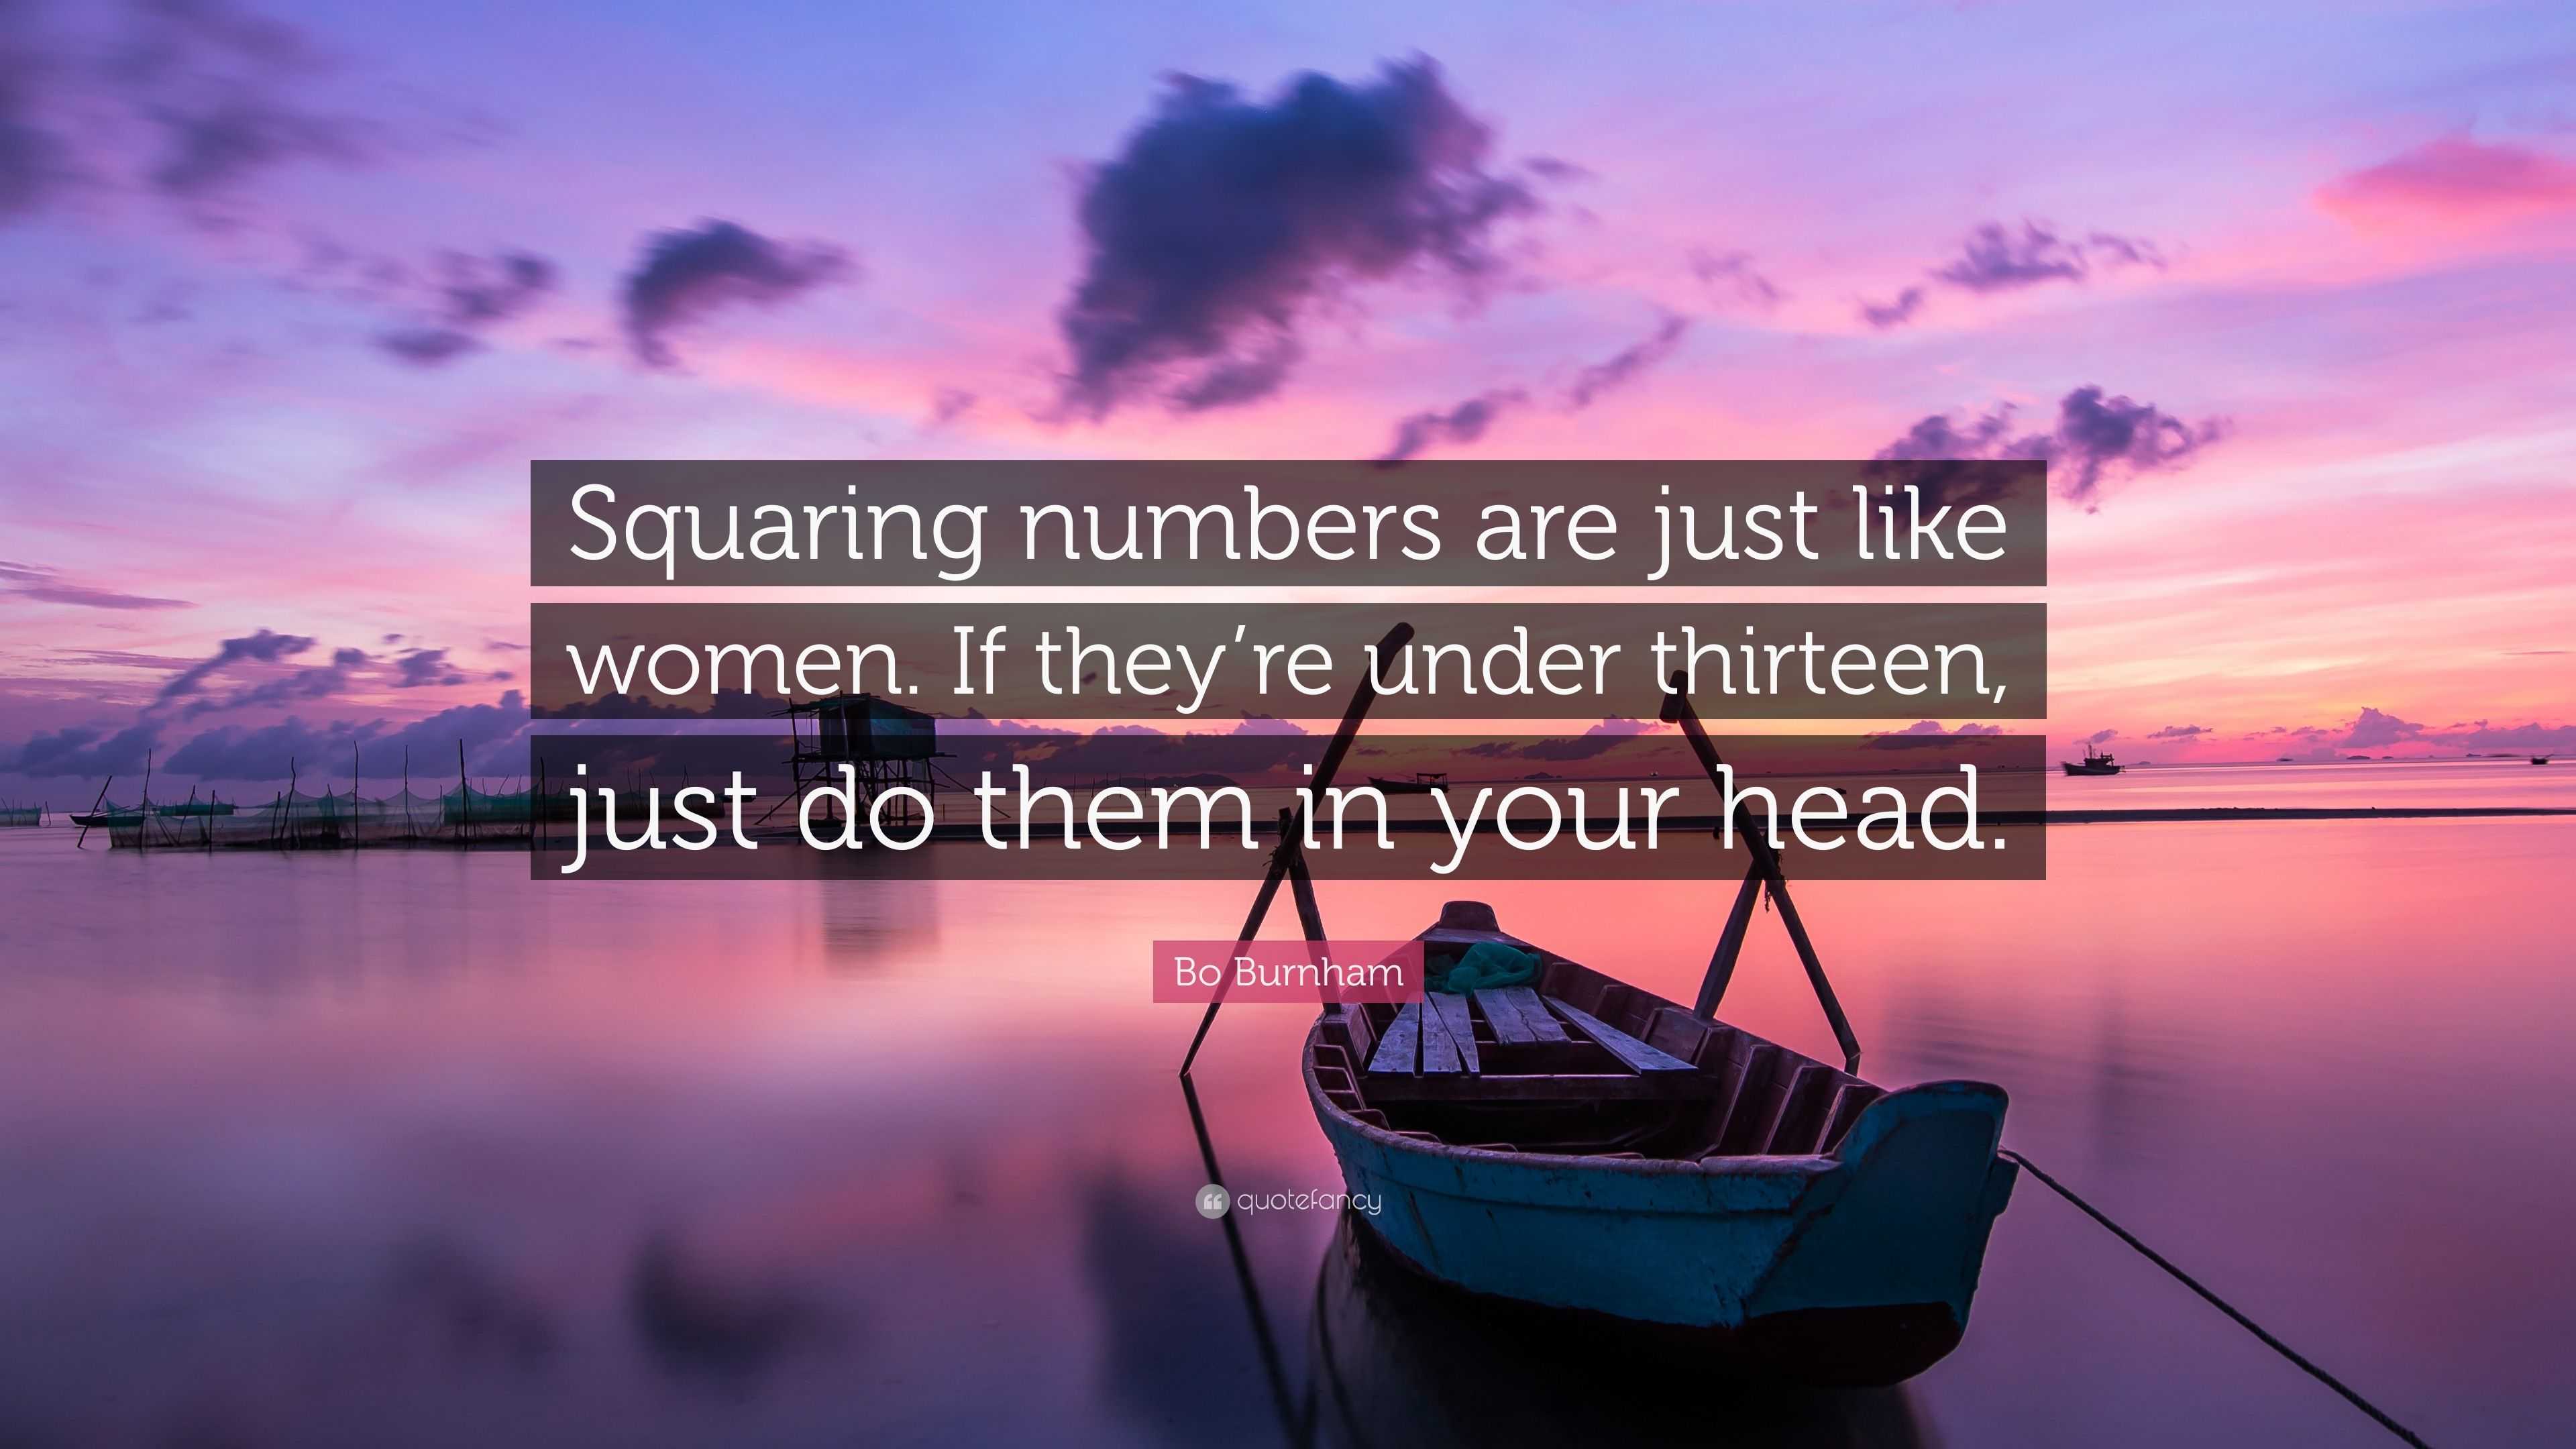 https://quotefancy.com/media/wallpaper/3840x2160/2479414-Bo-Burnham-Quote-Squaring-numbers-are-just-like-women-If-they-re.jpg